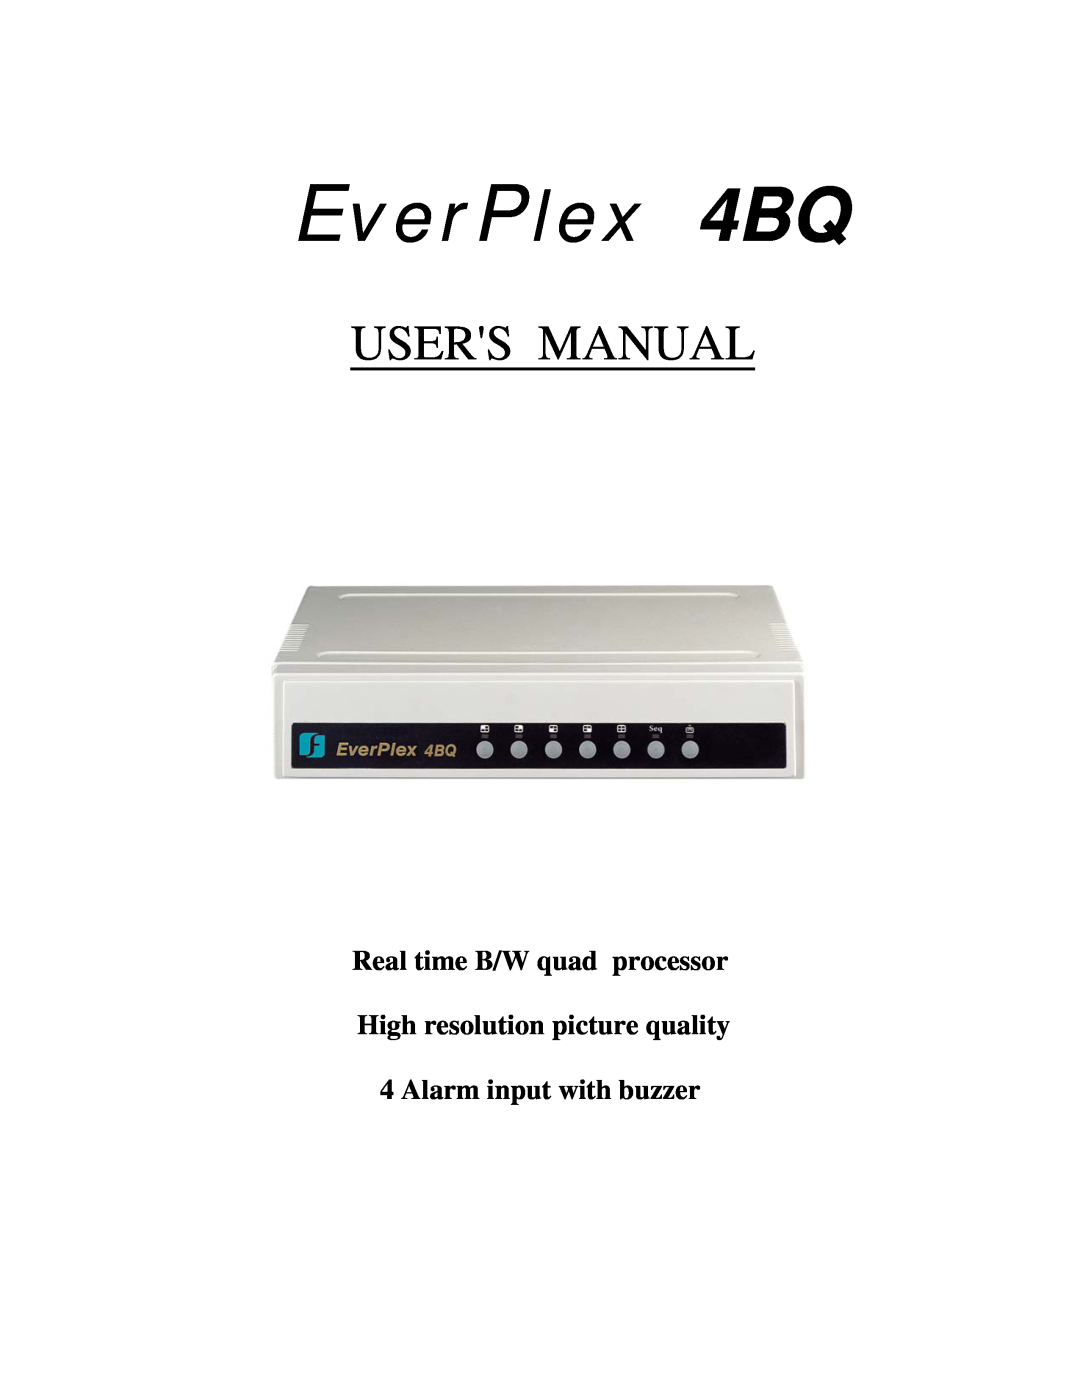 EverFocus 4BQ user manual Real time B/W quad processor, High resolution picture quality, Alarm input with buzzer 